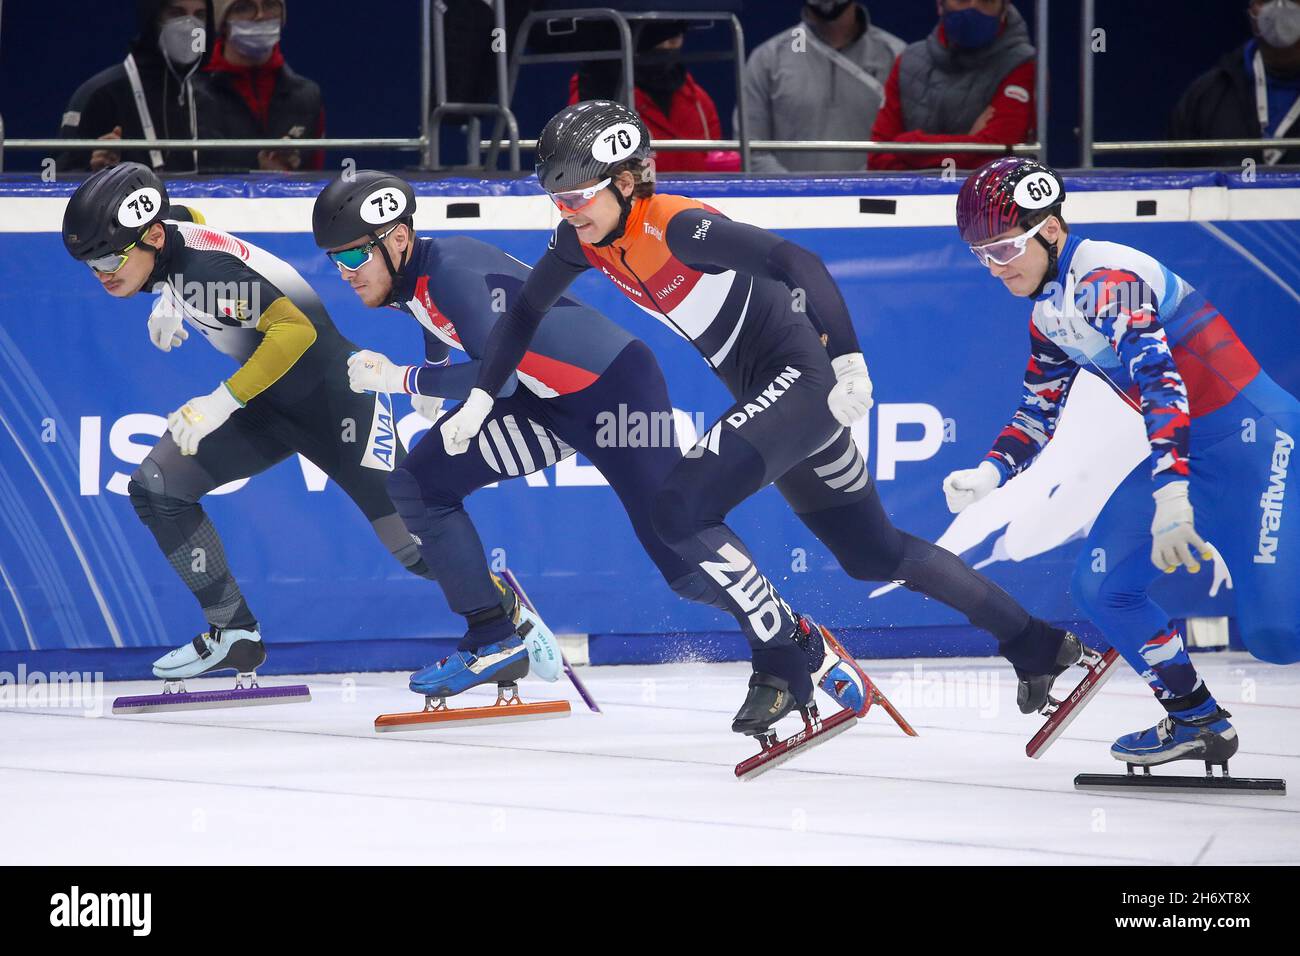 DEBRECEN, HUNGARY - NOVEMBER 18: Kota Kikuchi of Japan, Quentin Fercoq of France, Melle van 't Wout of The Netherlands, Daniil Eibog of Russia competing during the ISU World Cup Short Track Speed Skating at Fonix Arena on November 18, 2021 in Debrecen, Hungary (Photo by Istvan Derencsenyi/Orange Pictures) Stock Photo